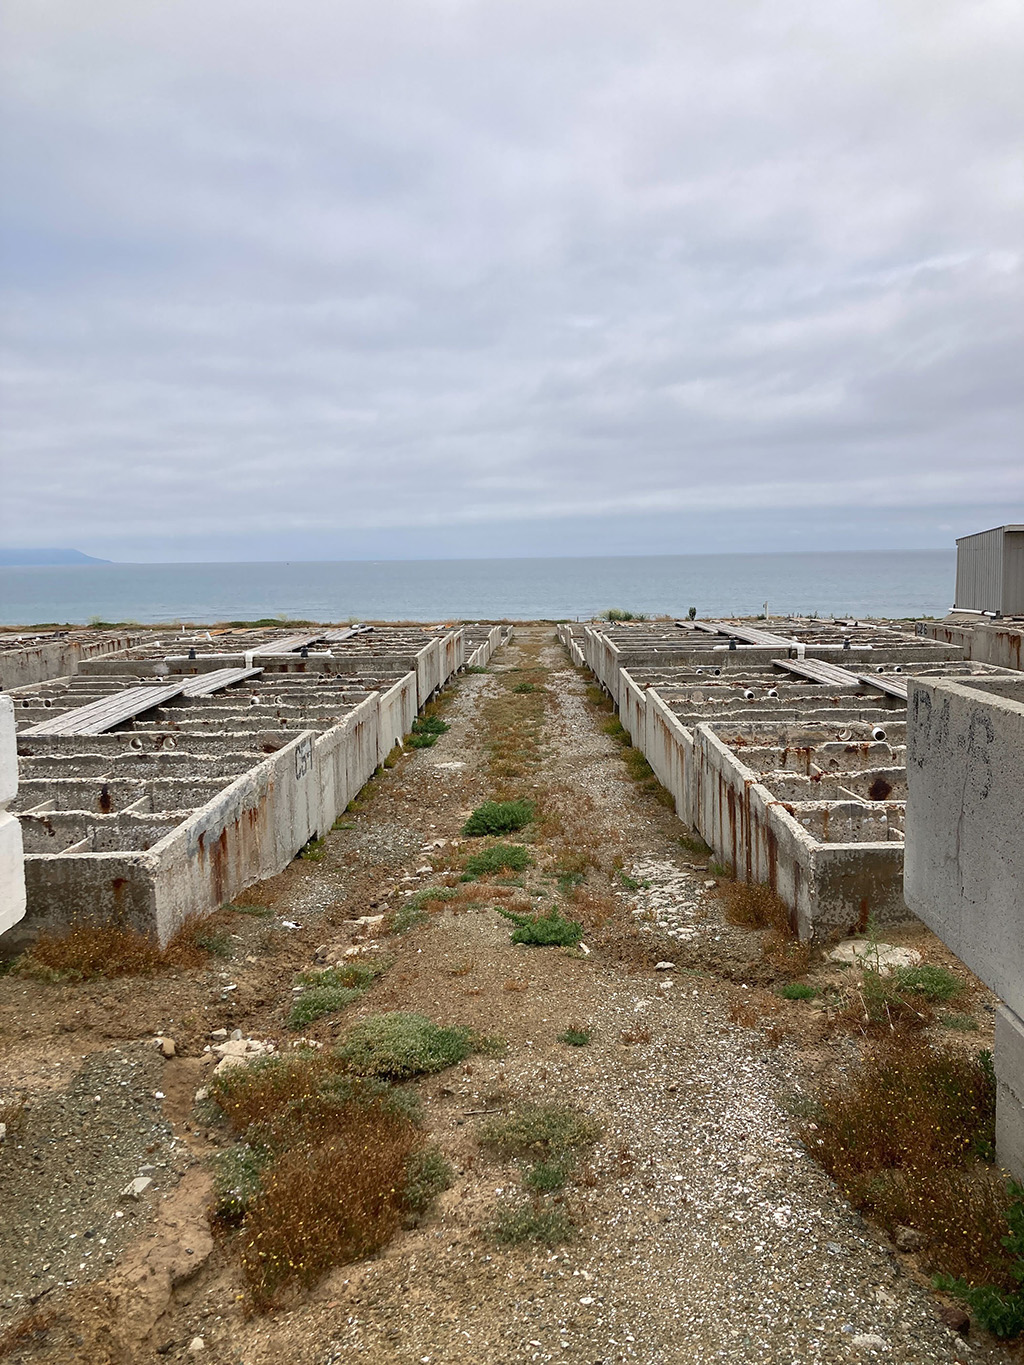 A photo overlooking the remaining gray infrastructure from the closed abalone farm. The gray of the Pacific Ocean is visible in the background, with a mountain peeking out below the fog to the left of the viewer.